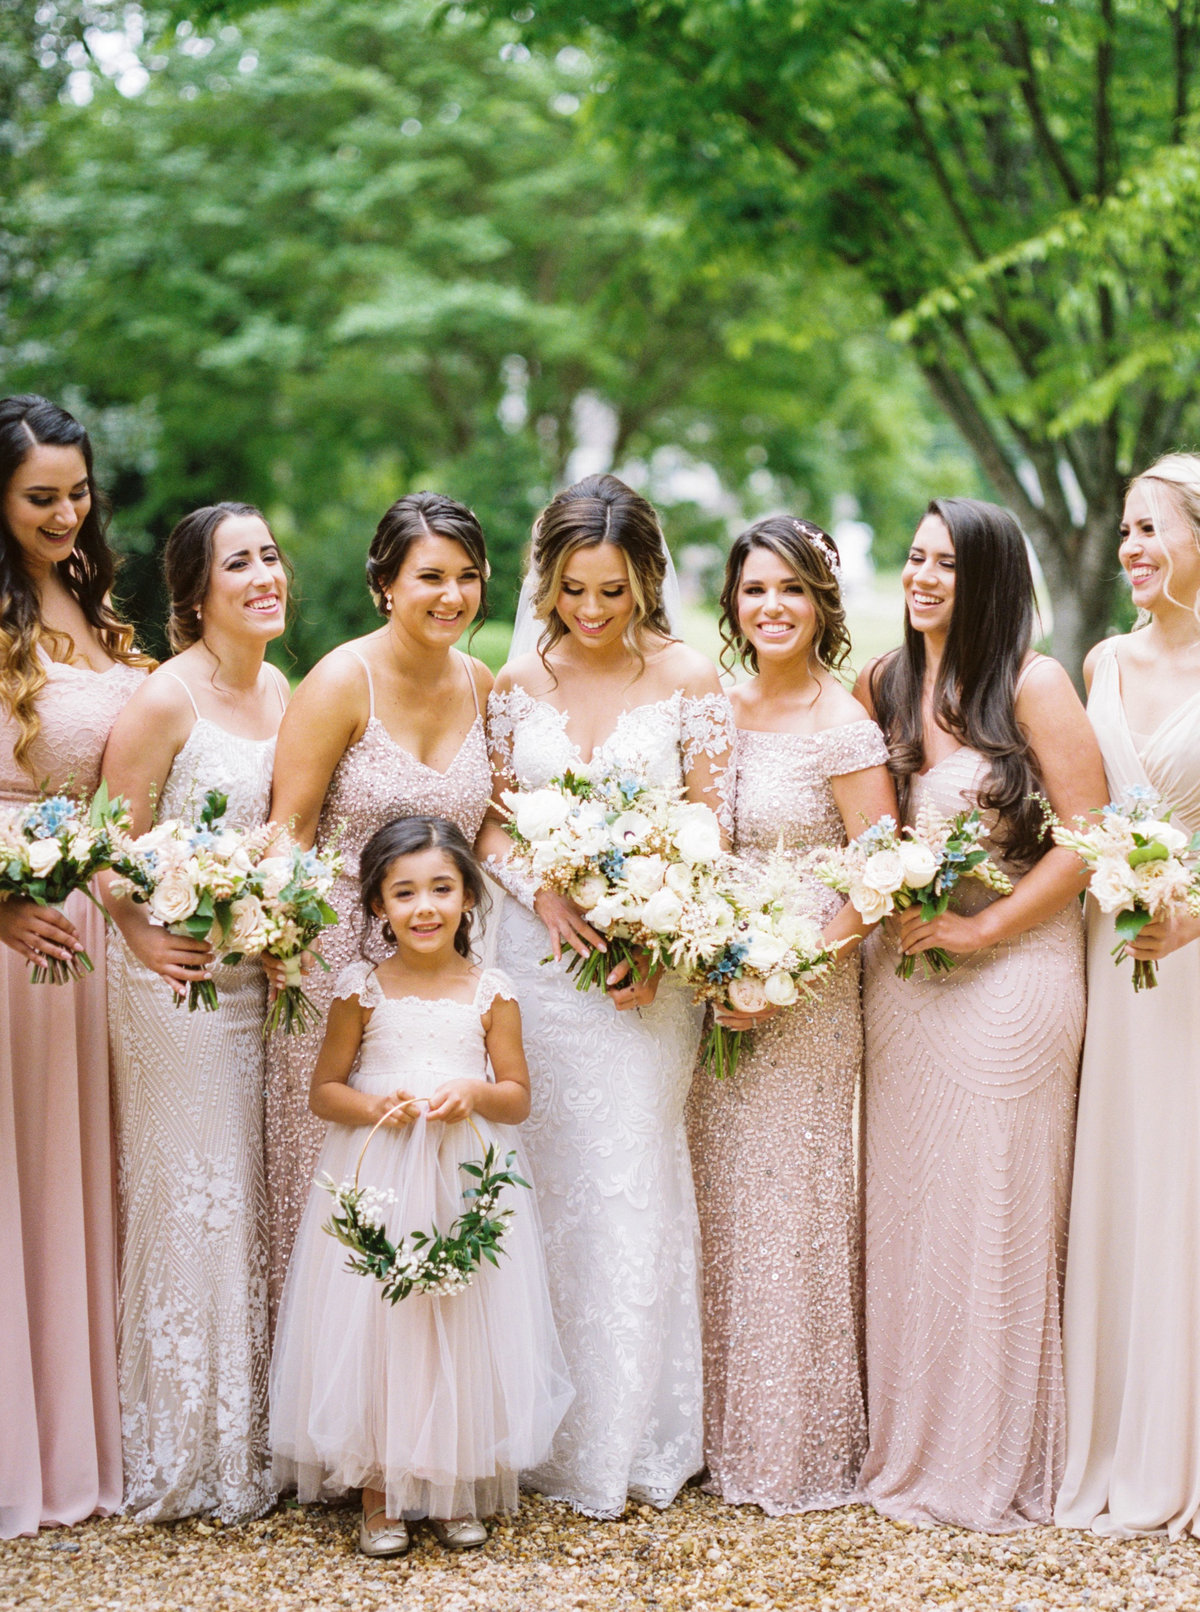 Bridesmaids in blush and sequin gowns, flower girl with floral hoop